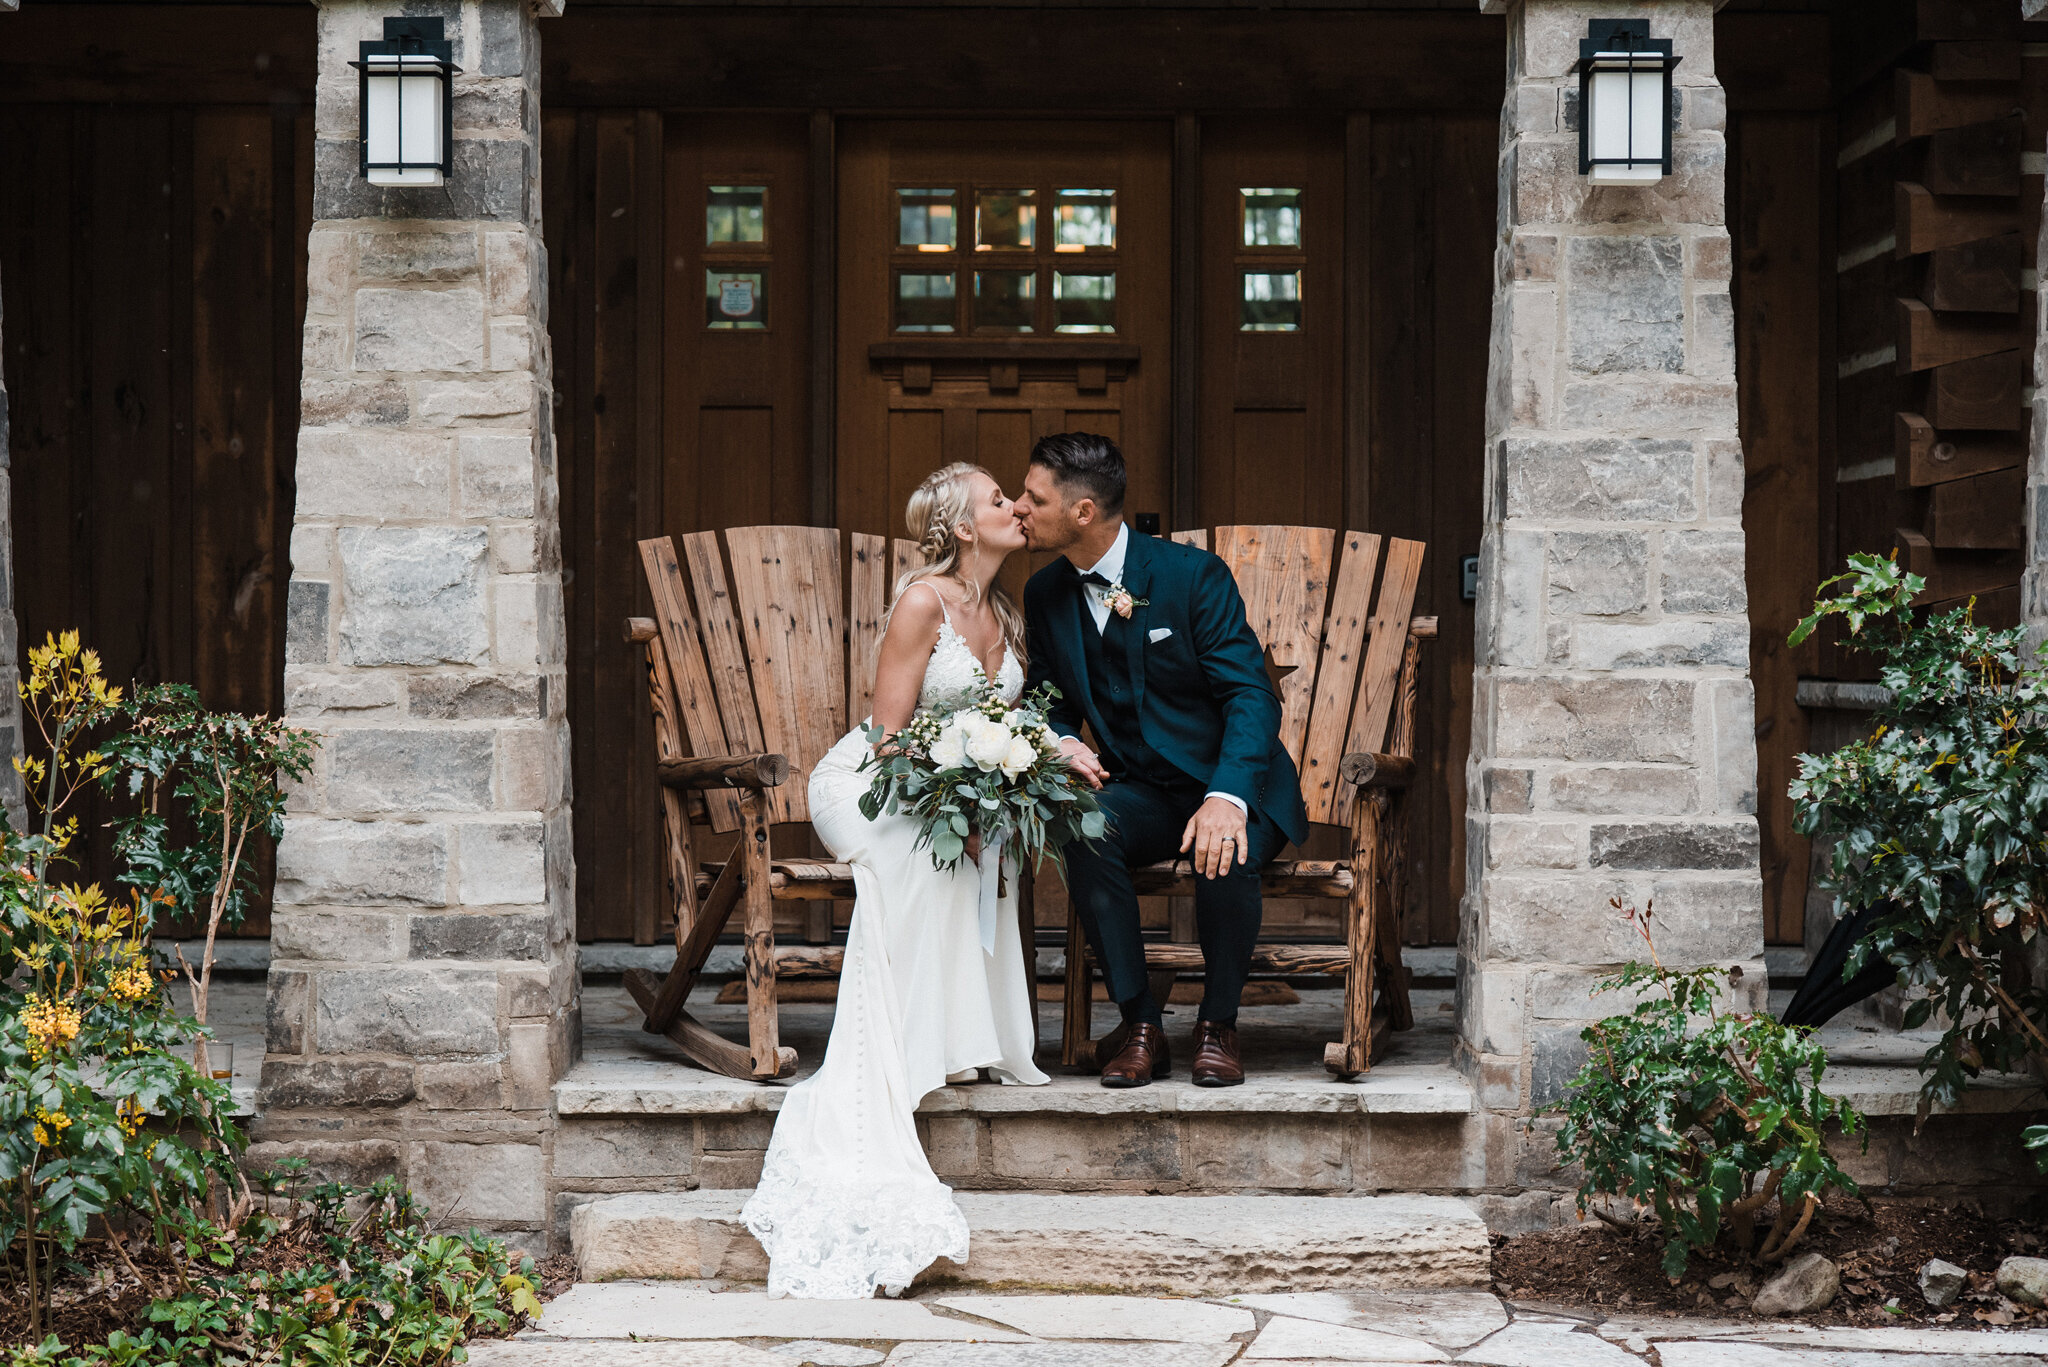 Romantic wedding kiss in front of Serenity Cottage